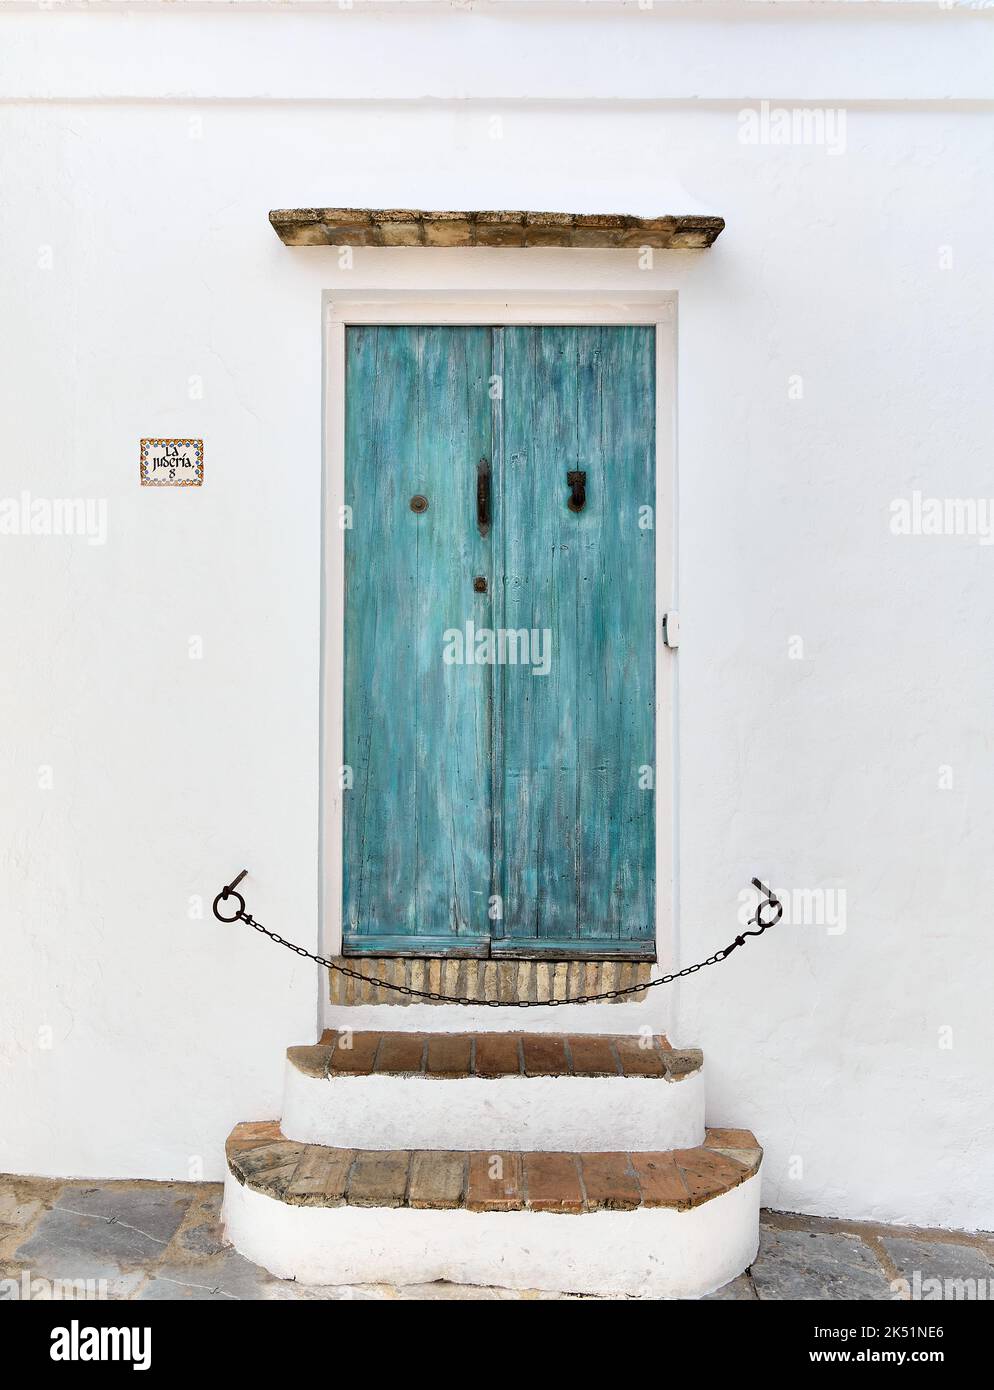 Old wooden door painted in blue with white facade Stock Photo